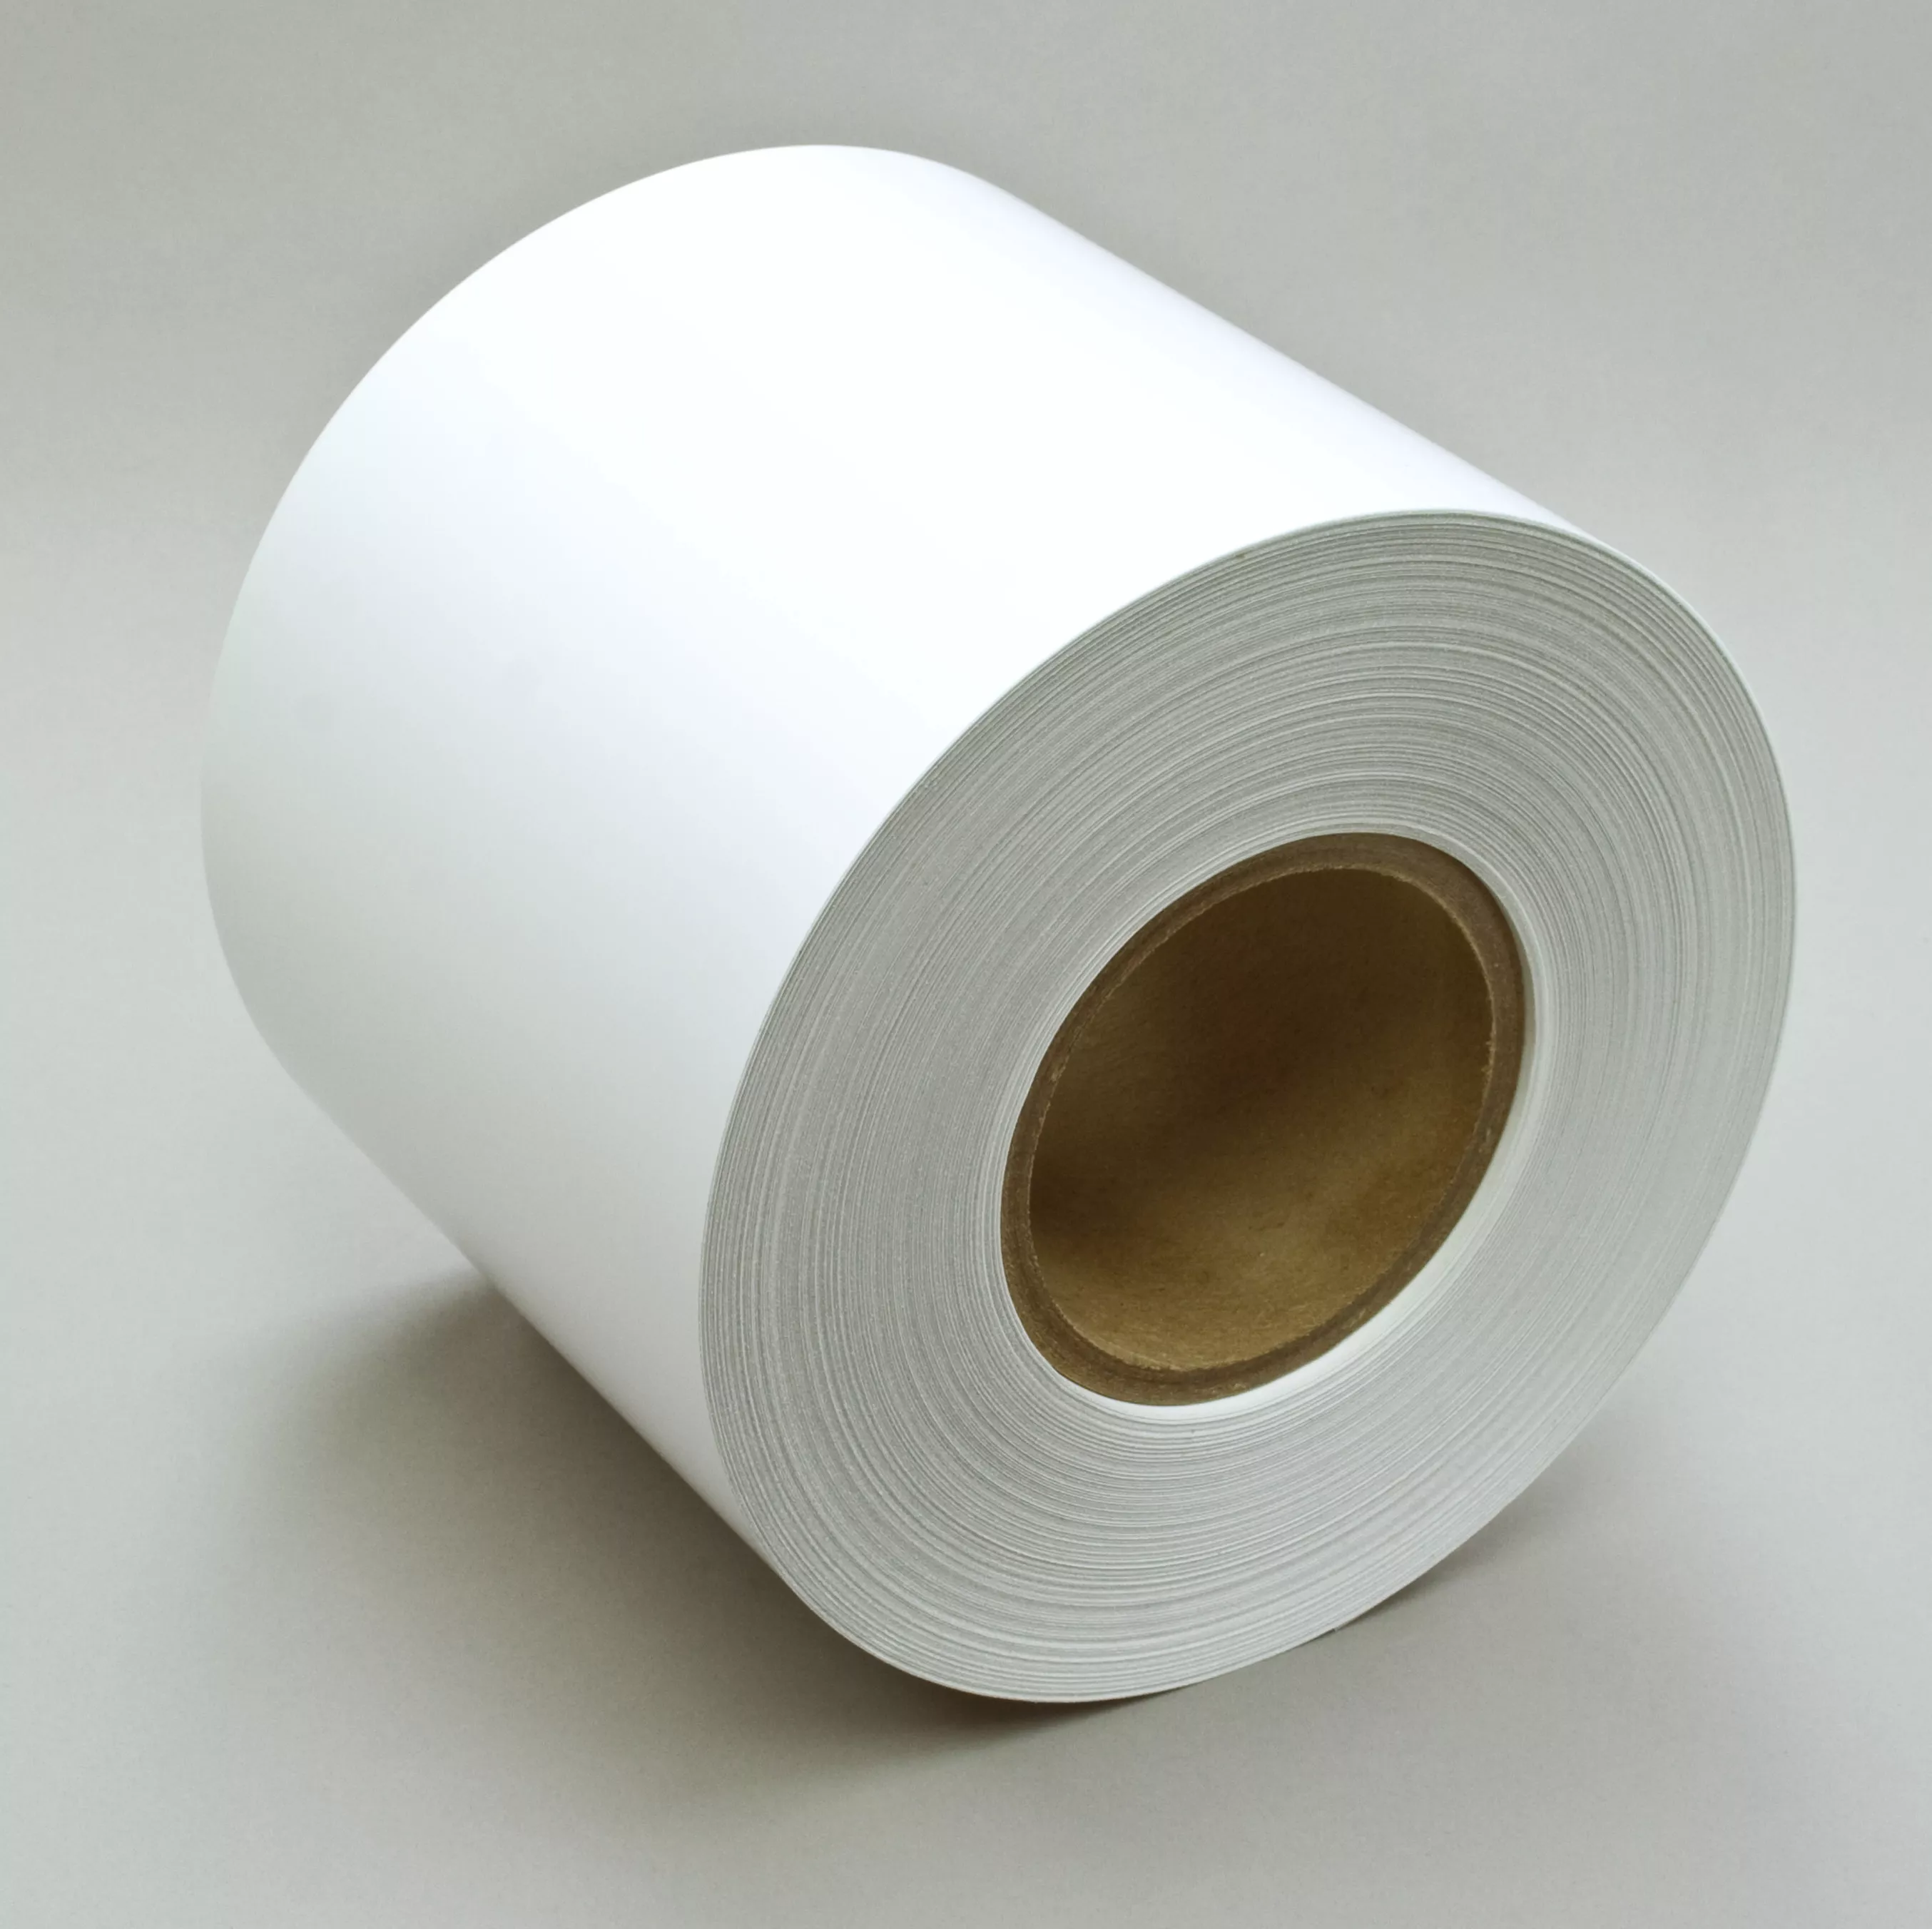 3M™ Health Care Label Material 7000, White High Gloss Paper, 6 in x 1668
ft, 1 Roll/Case